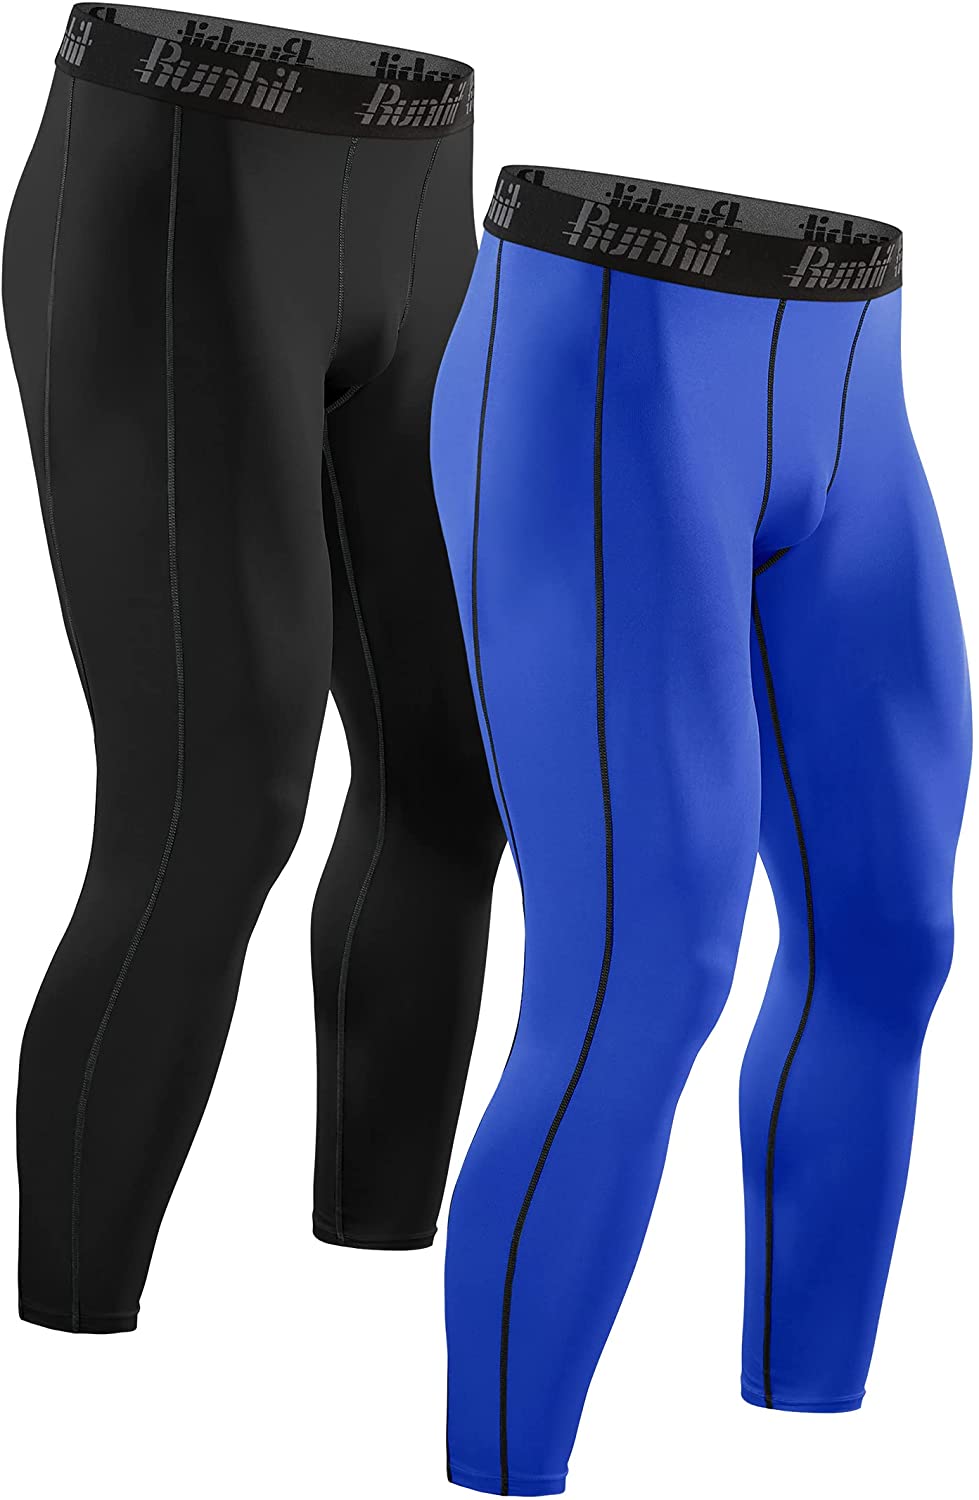 Men's running tights, compression pants, cold weather running, training  tights, gym leggings, yoga leggings, barr…